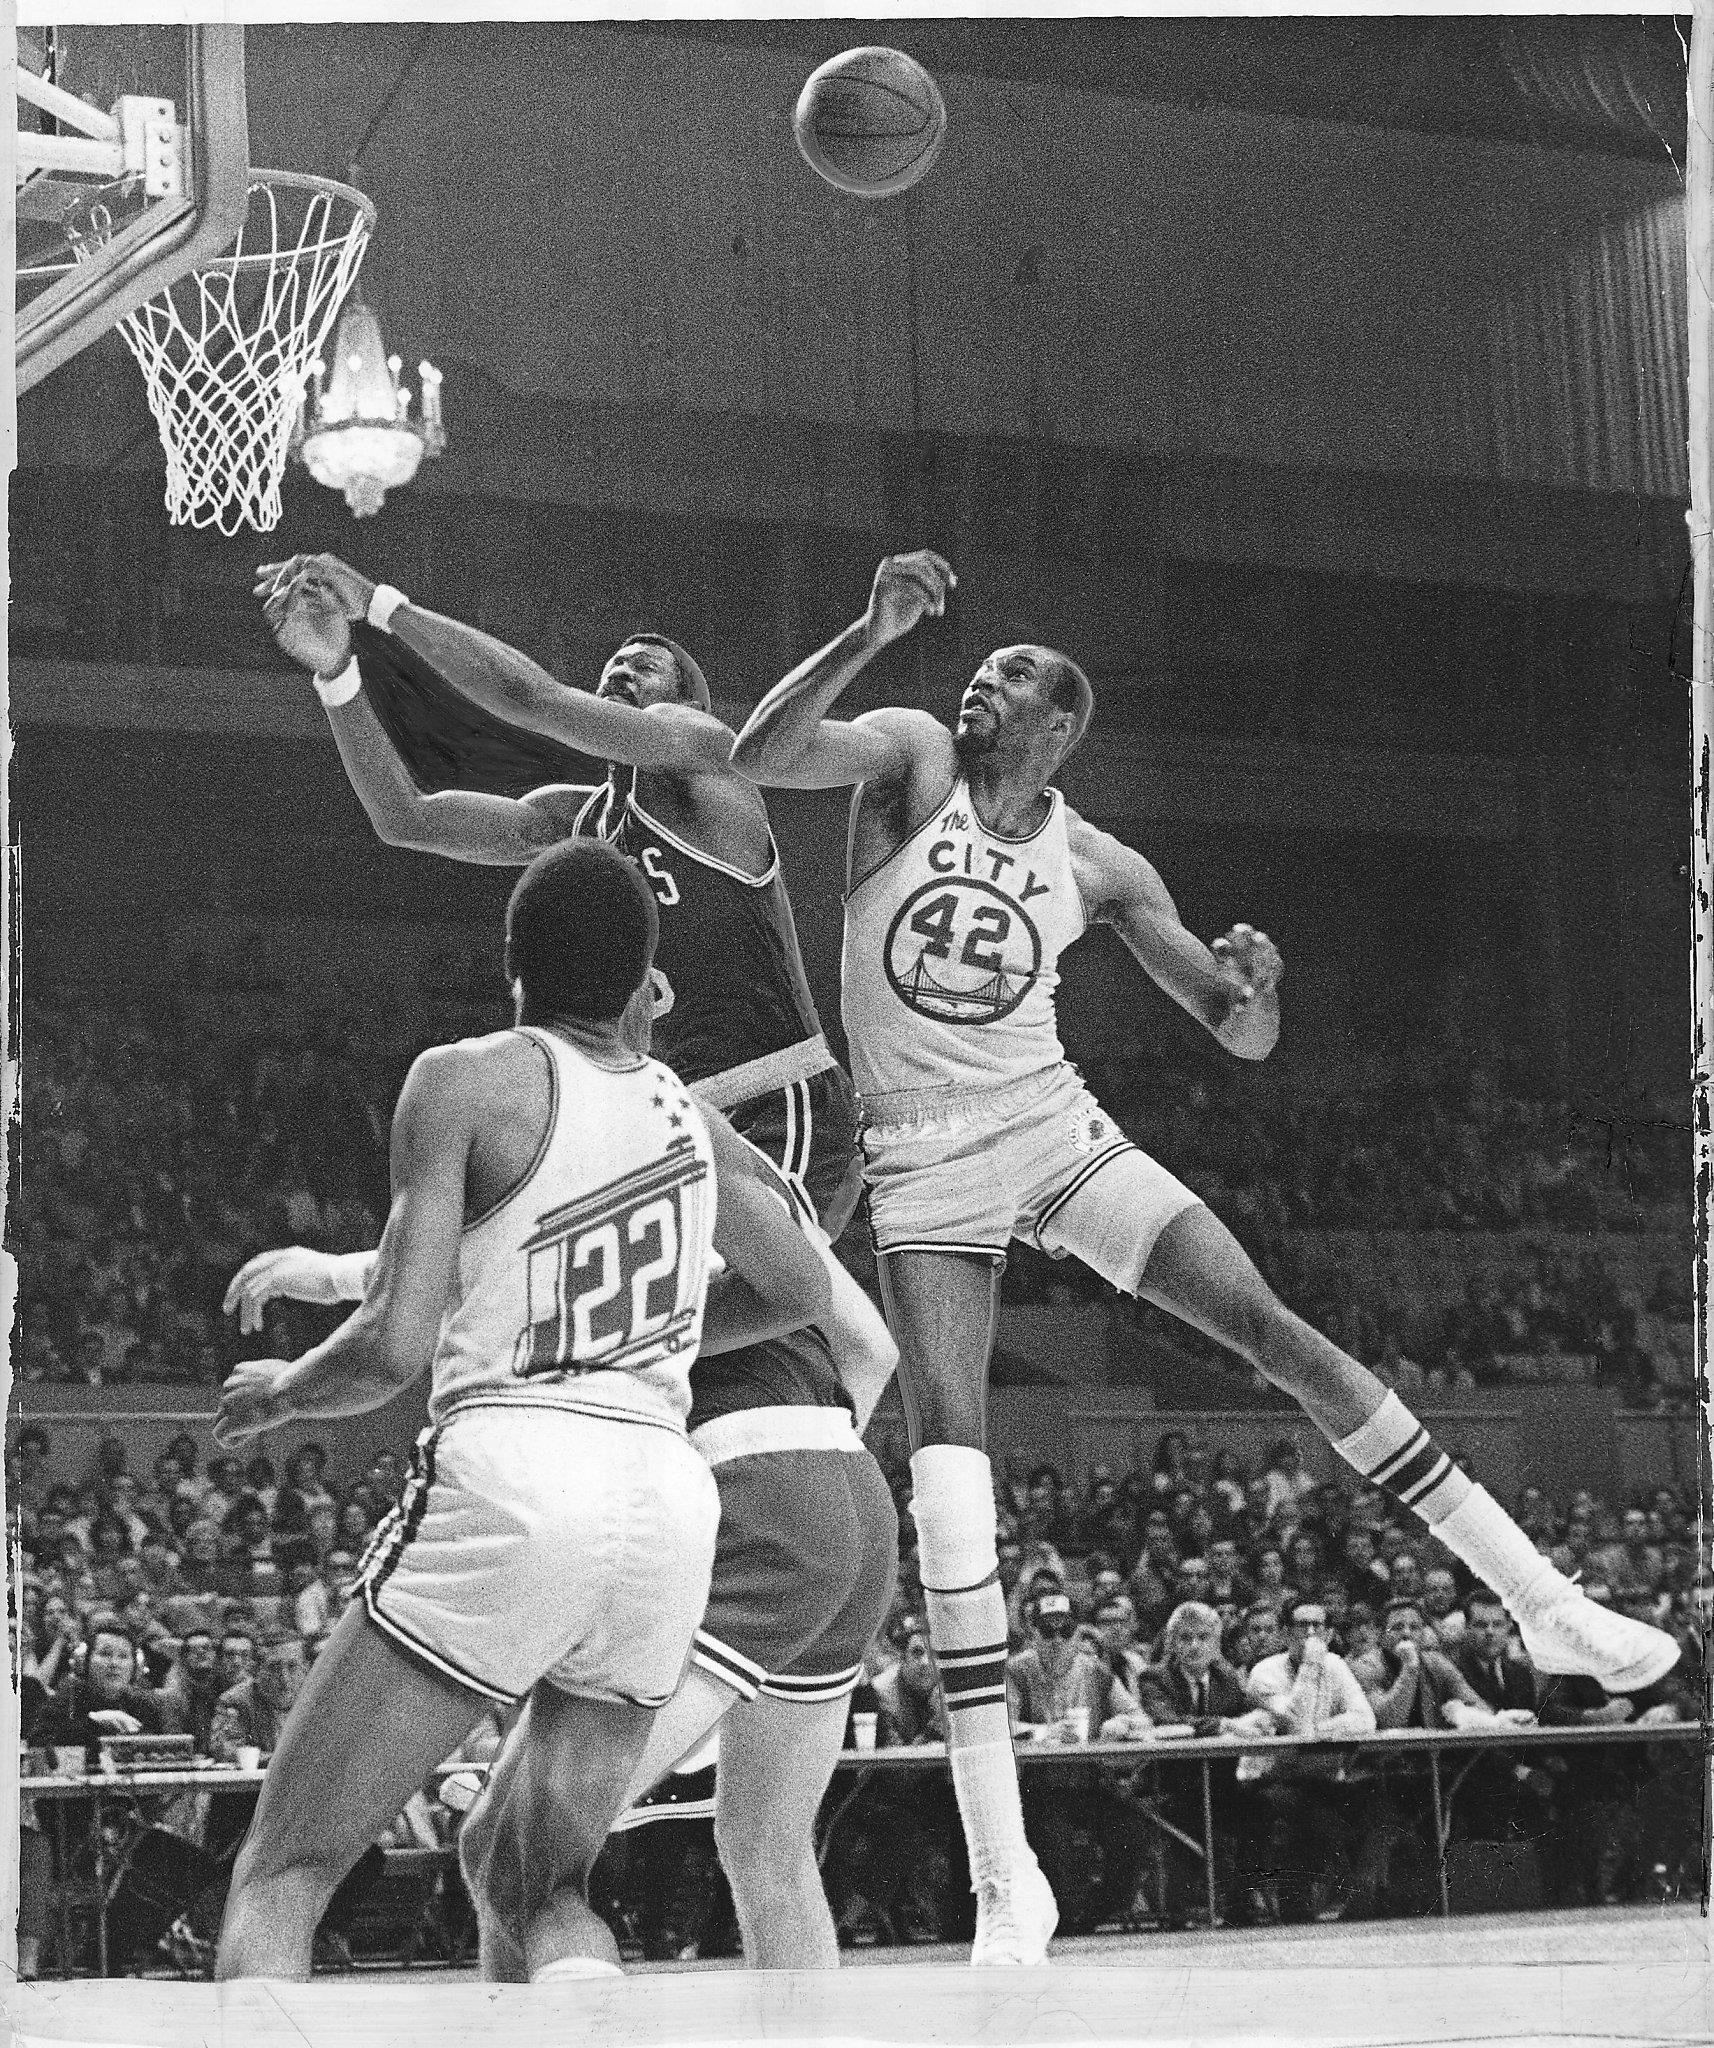 Former Cavaliers and NBA great Nate Thurmond dies at 74